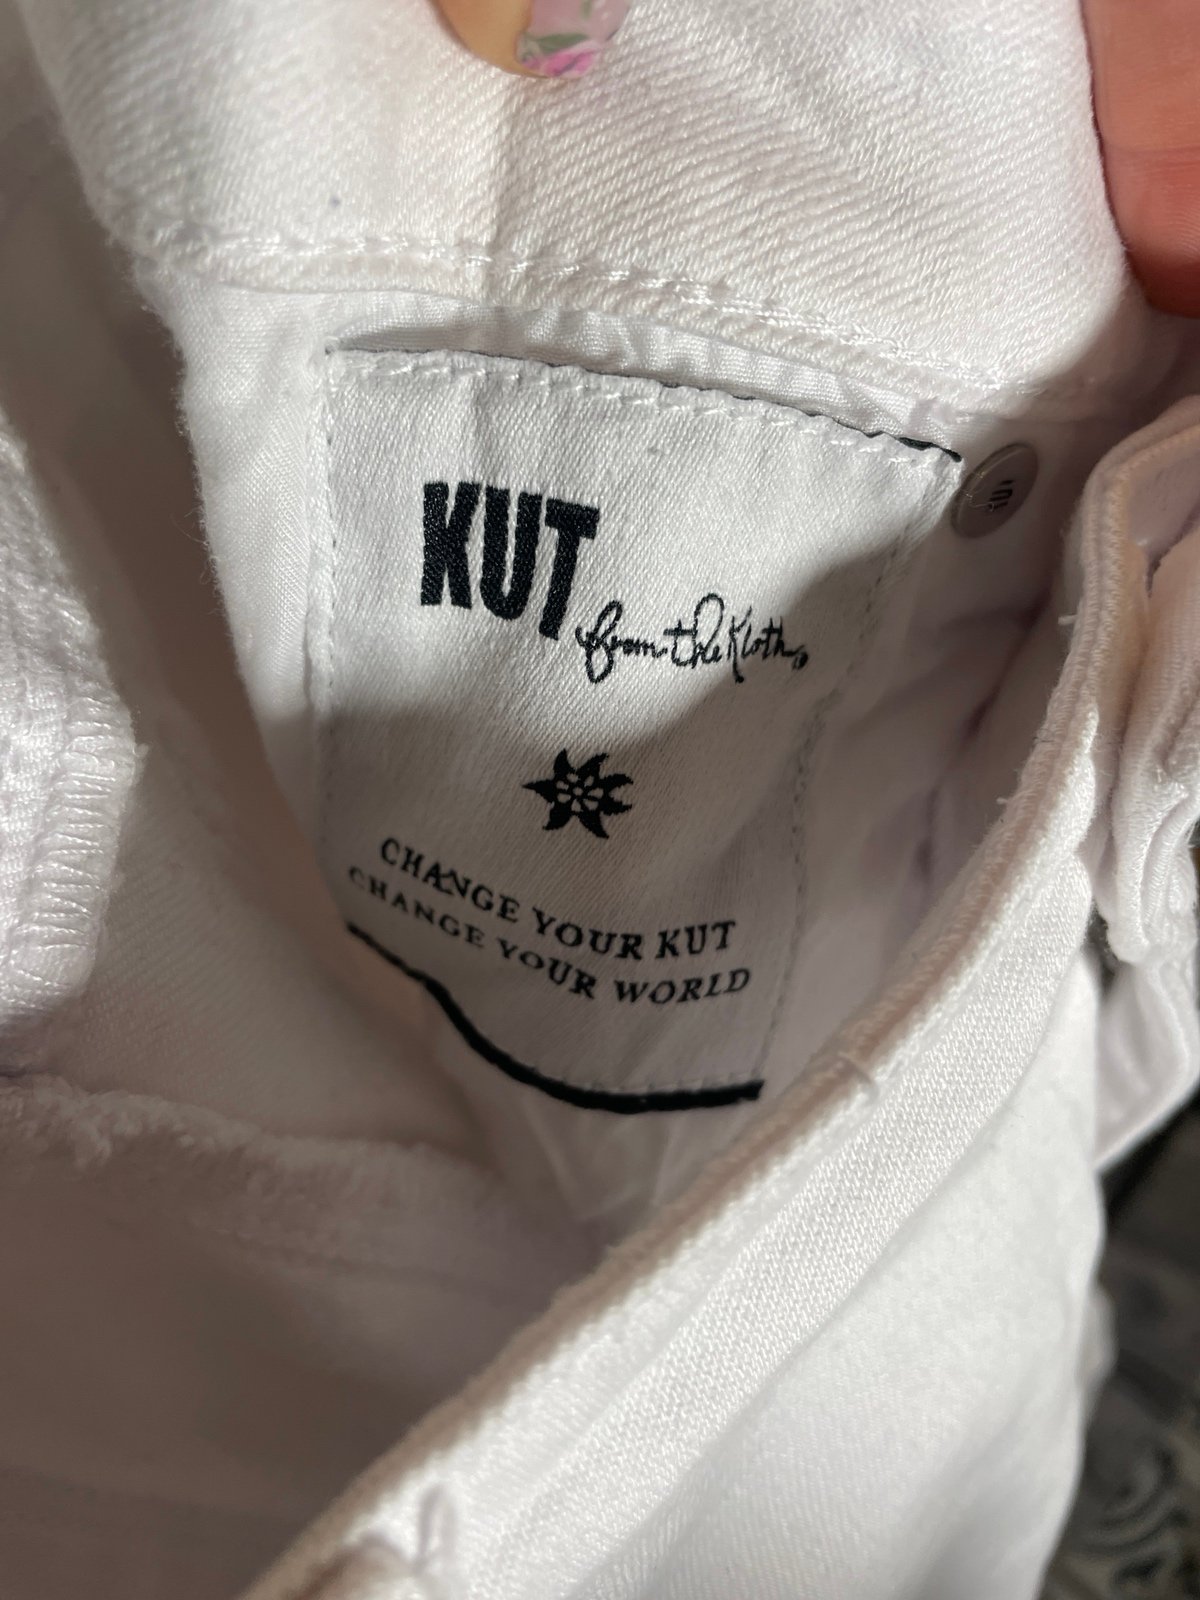 cheapest place to buy  Kut From The Kloth Sz 4 Jeans JDYPkzNqV online store